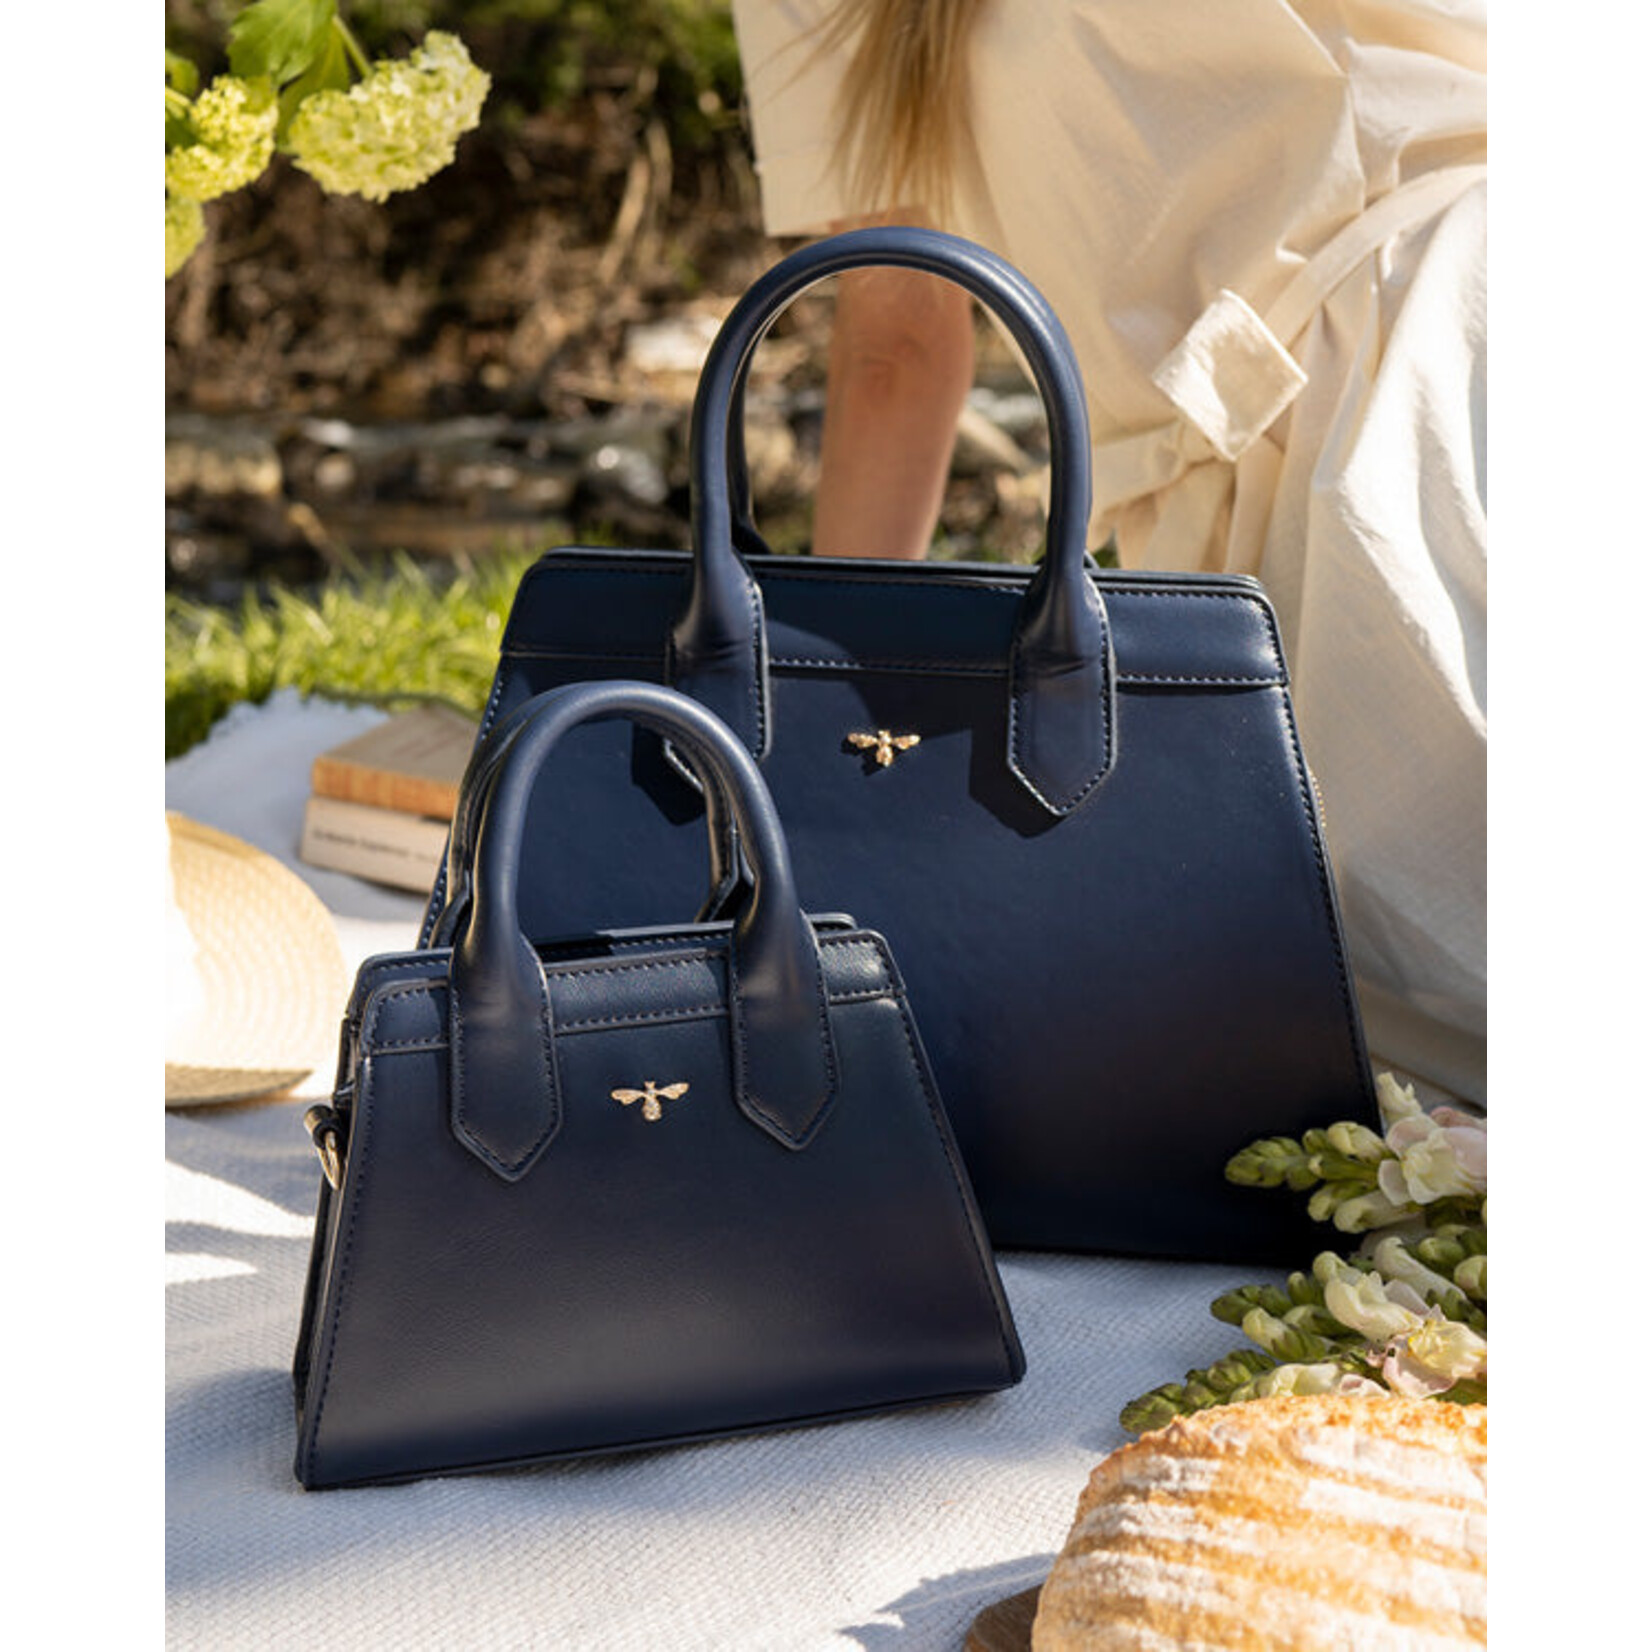 Fable England Royal Ditsy Tote Navy